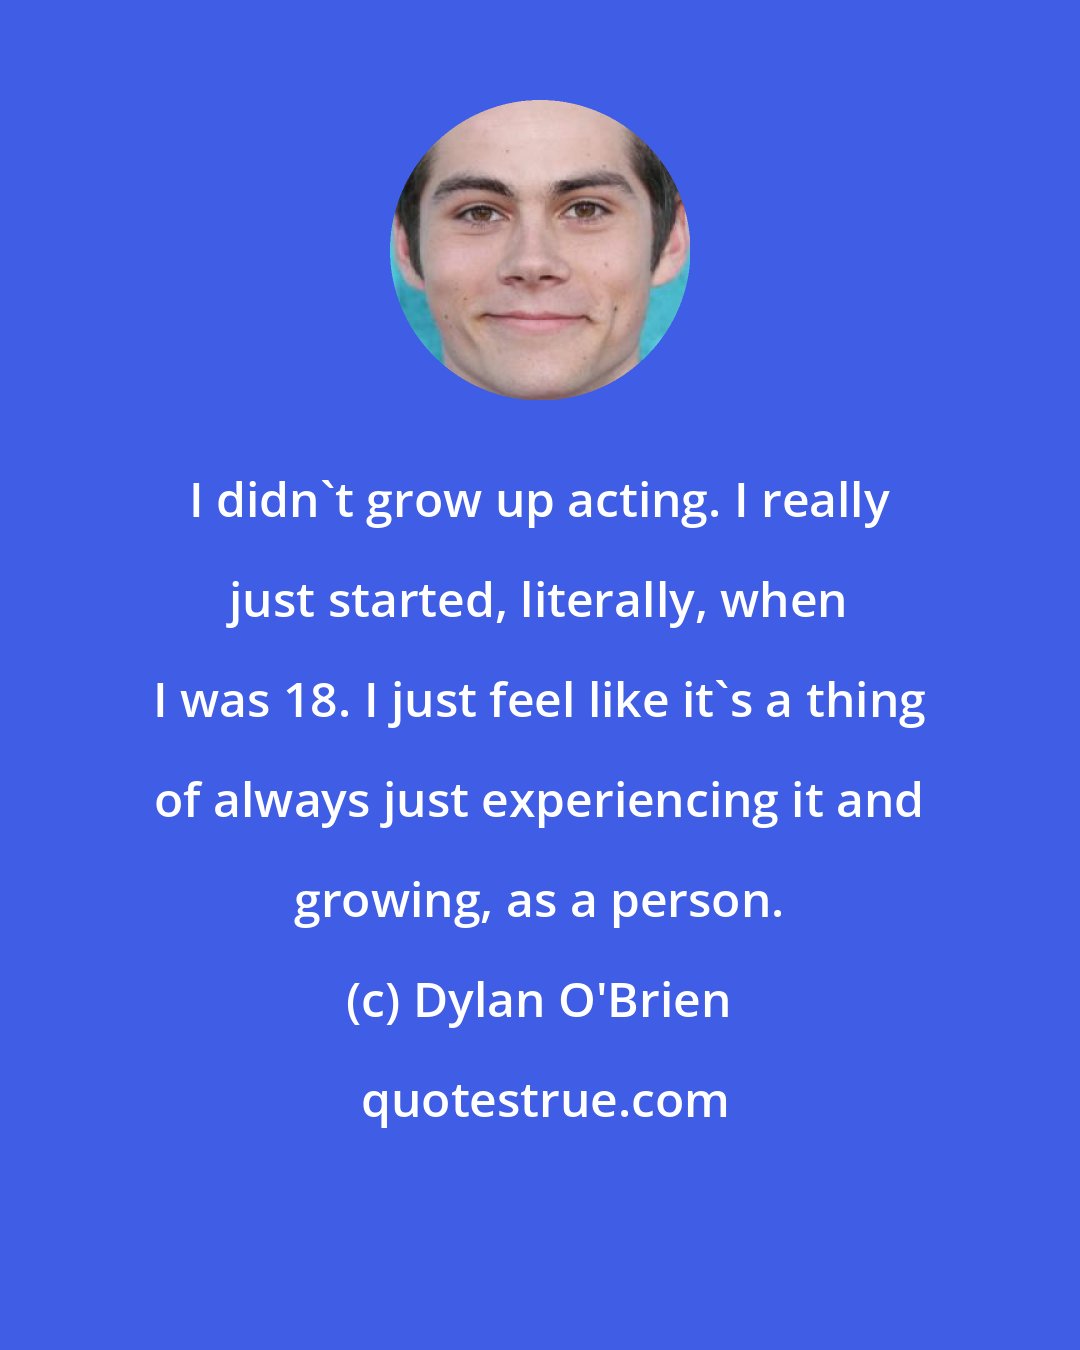 Dylan O'Brien: I didn't grow up acting. I really just started, literally, when I was 18. I just feel like it's a thing of always just experiencing it and growing, as a person.